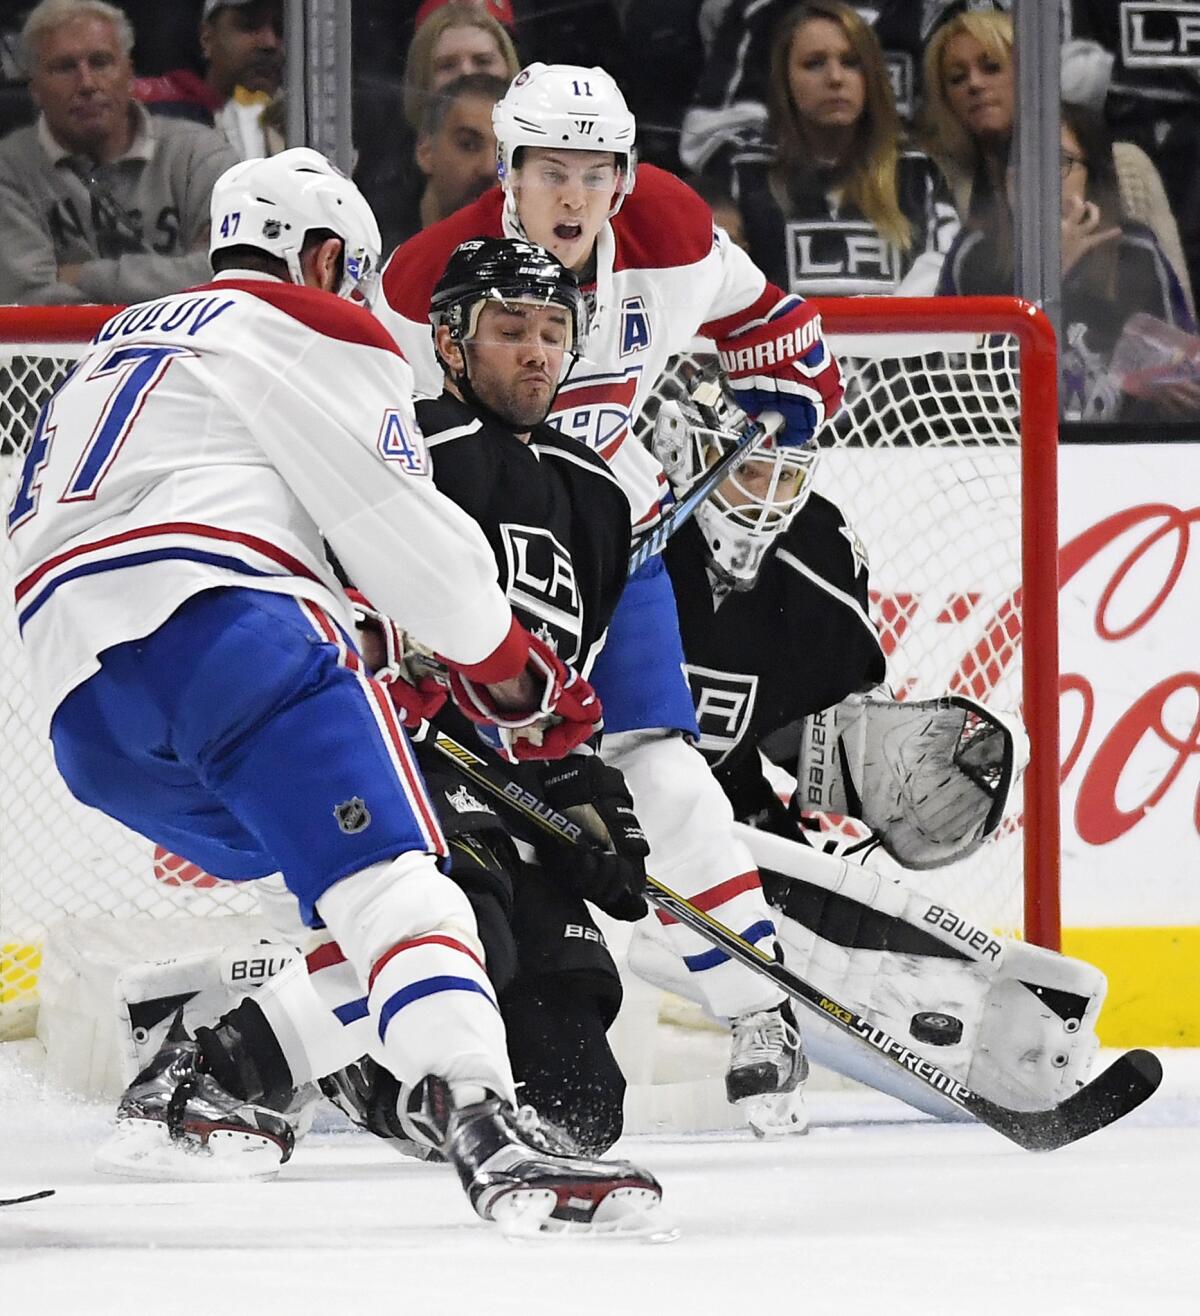 Canadiens right wing Alexander Radulov, left, scores on Kings goalie Peter Budaj, right, as defenseman Alec Martinez tries to stop the shot and Canadiens right wing Brendan Gallagher positions himself in front during the second period.